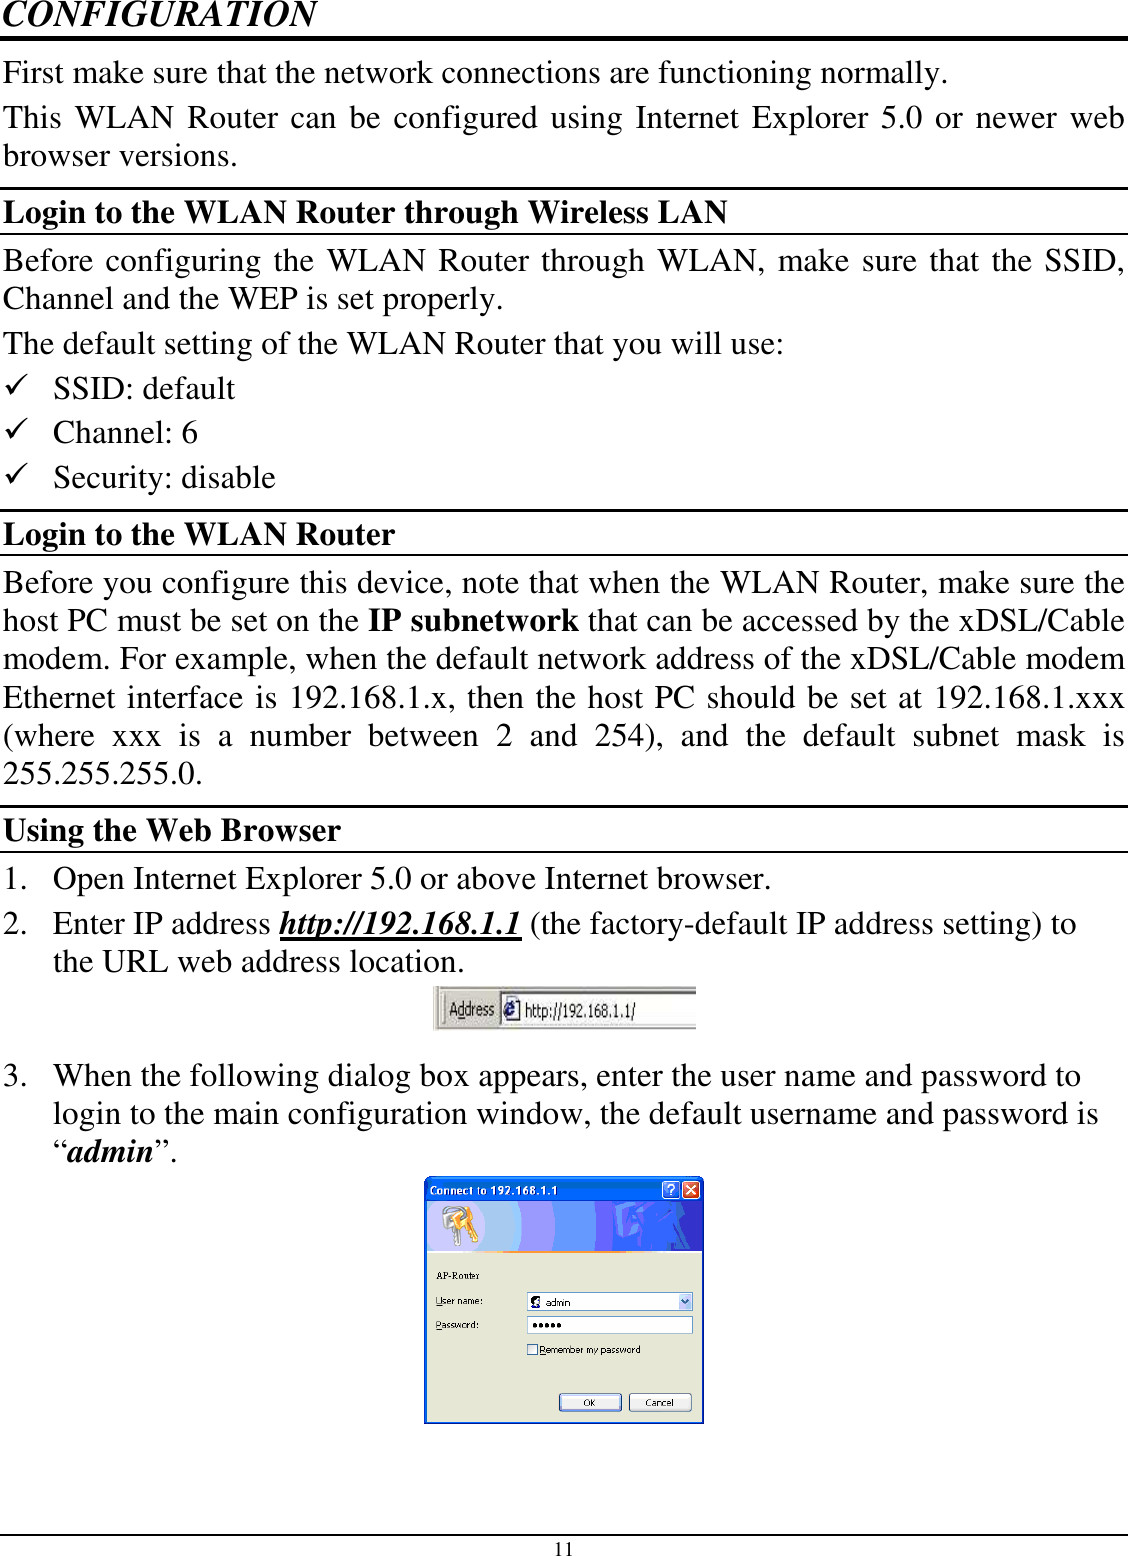 11 CONFIGURATION First make sure that the network connections are functioning normally.  This WLAN Router can be configured using Internet Explorer 5.0 or newer web browser versions. Login to the WLAN Router through Wireless LAN Before configuring the WLAN Router through WLAN, make sure that the SSID, Channel and the WEP is set properly. The default setting of the WLAN Router that you will use:  SSID: default  Channel: 6  Security: disable Login to the WLAN Router Before you configure this device, note that when the WLAN Router, make sure the host PC must be set on the IP subnetwork that can be accessed by the xDSL/Cable modem. For example, when the default network address of the xDSL/Cable modem Ethernet interface is 192.168.1.x, then the host PC should be set at 192.168.1.xxx (where  xxx  is  a  number  between  2  and  254),  and  the  default  subnet  mask  is 255.255.255.0. Using the Web Browser 1. Open Internet Explorer 5.0 or above Internet browser. 2. Enter IP address http://192.168.1.1 (the factory-default IP address setting) to the URL web address location.  3. When the following dialog box appears, enter the user name and password to login to the main configuration window, the default username and password is “admin”.    